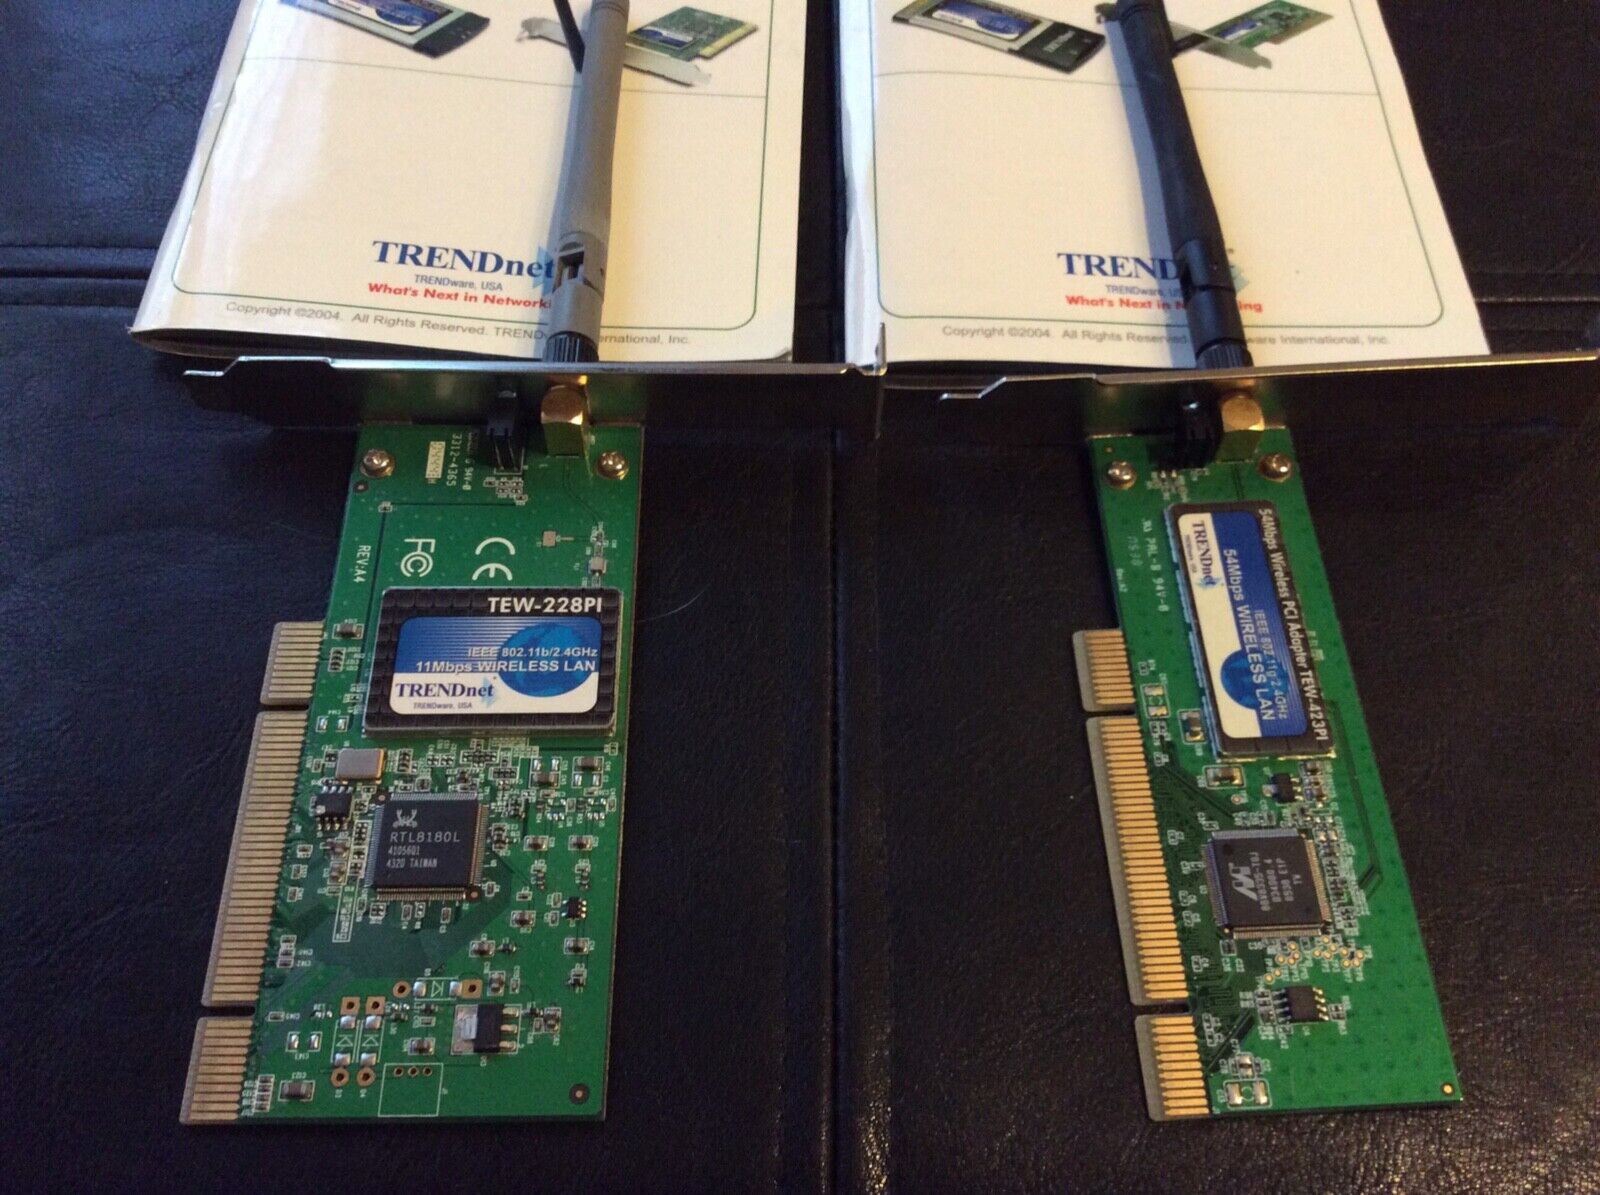 Trendnet TEW-423PI  and TEW-228PI  Wireless Adapters